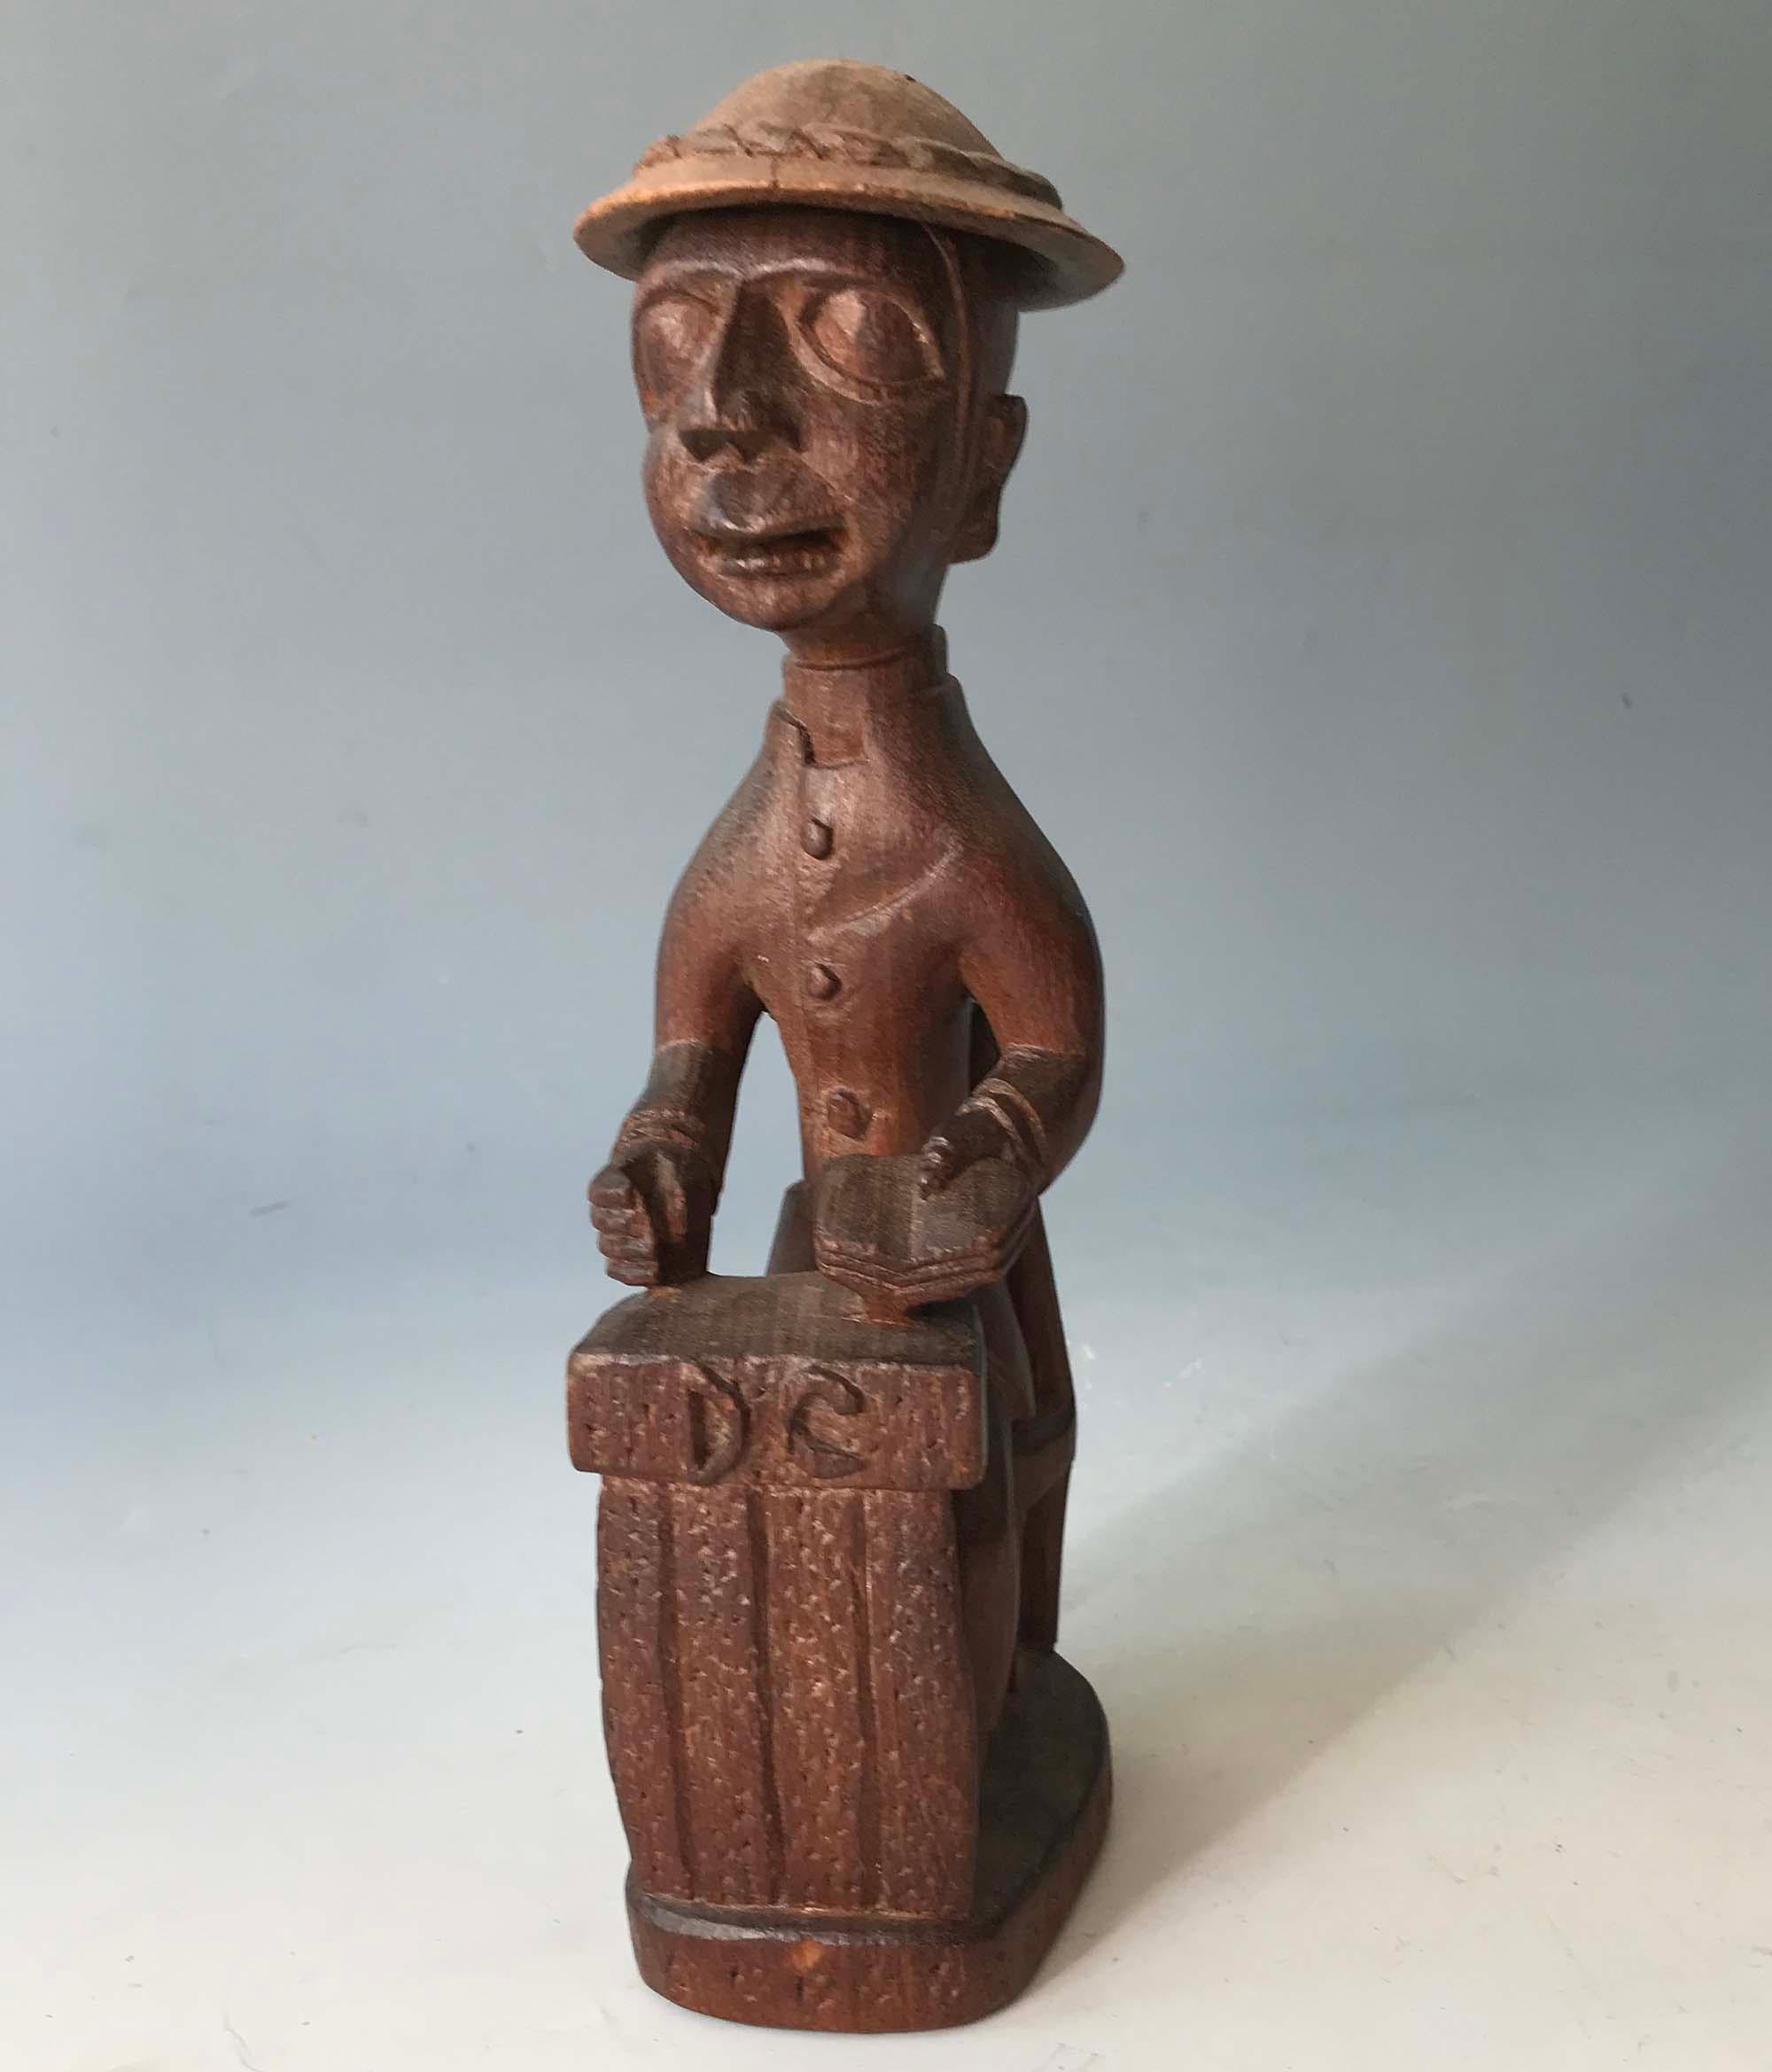 Thomas Ona Odulate carving district commissioner Yoruba African Tribal Nigeria
A carved figure of a British colonial district commissioner in Nigeria 
Circa 1920s/30s,
Measures: Height 22 cm
Condition: Good with minor wear

Thomas Ona (1900-1952),